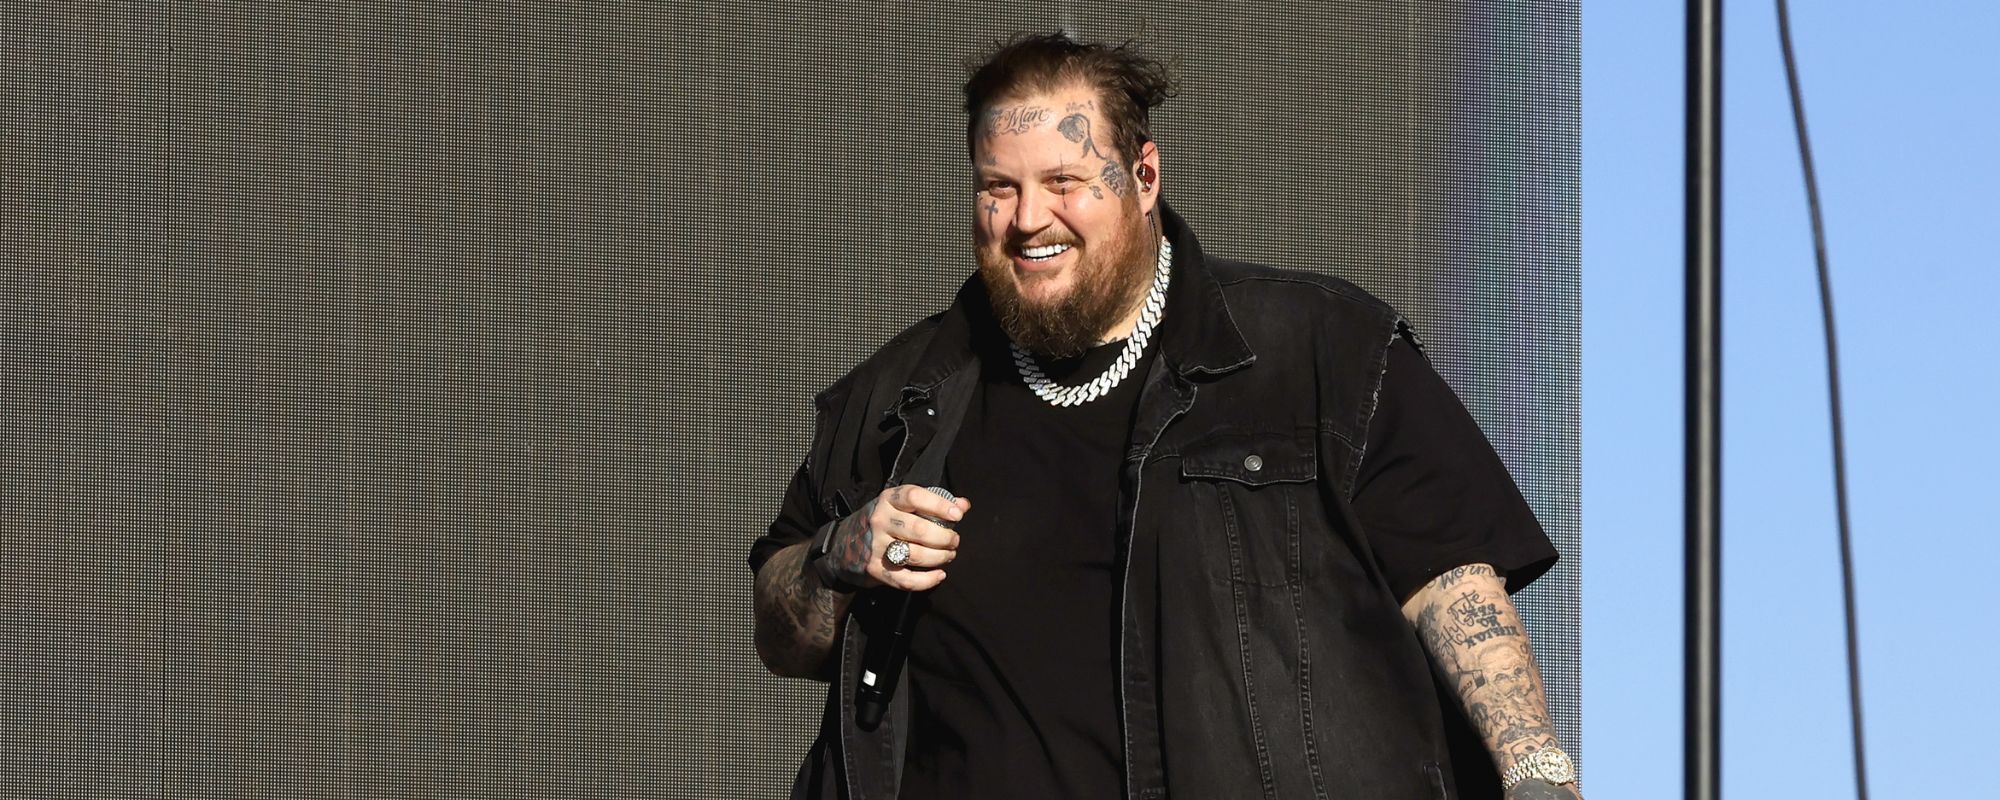 Jelly Roll Fans Rejoice: Country Star Reveals Plans to Debut New Music During ACM Awards